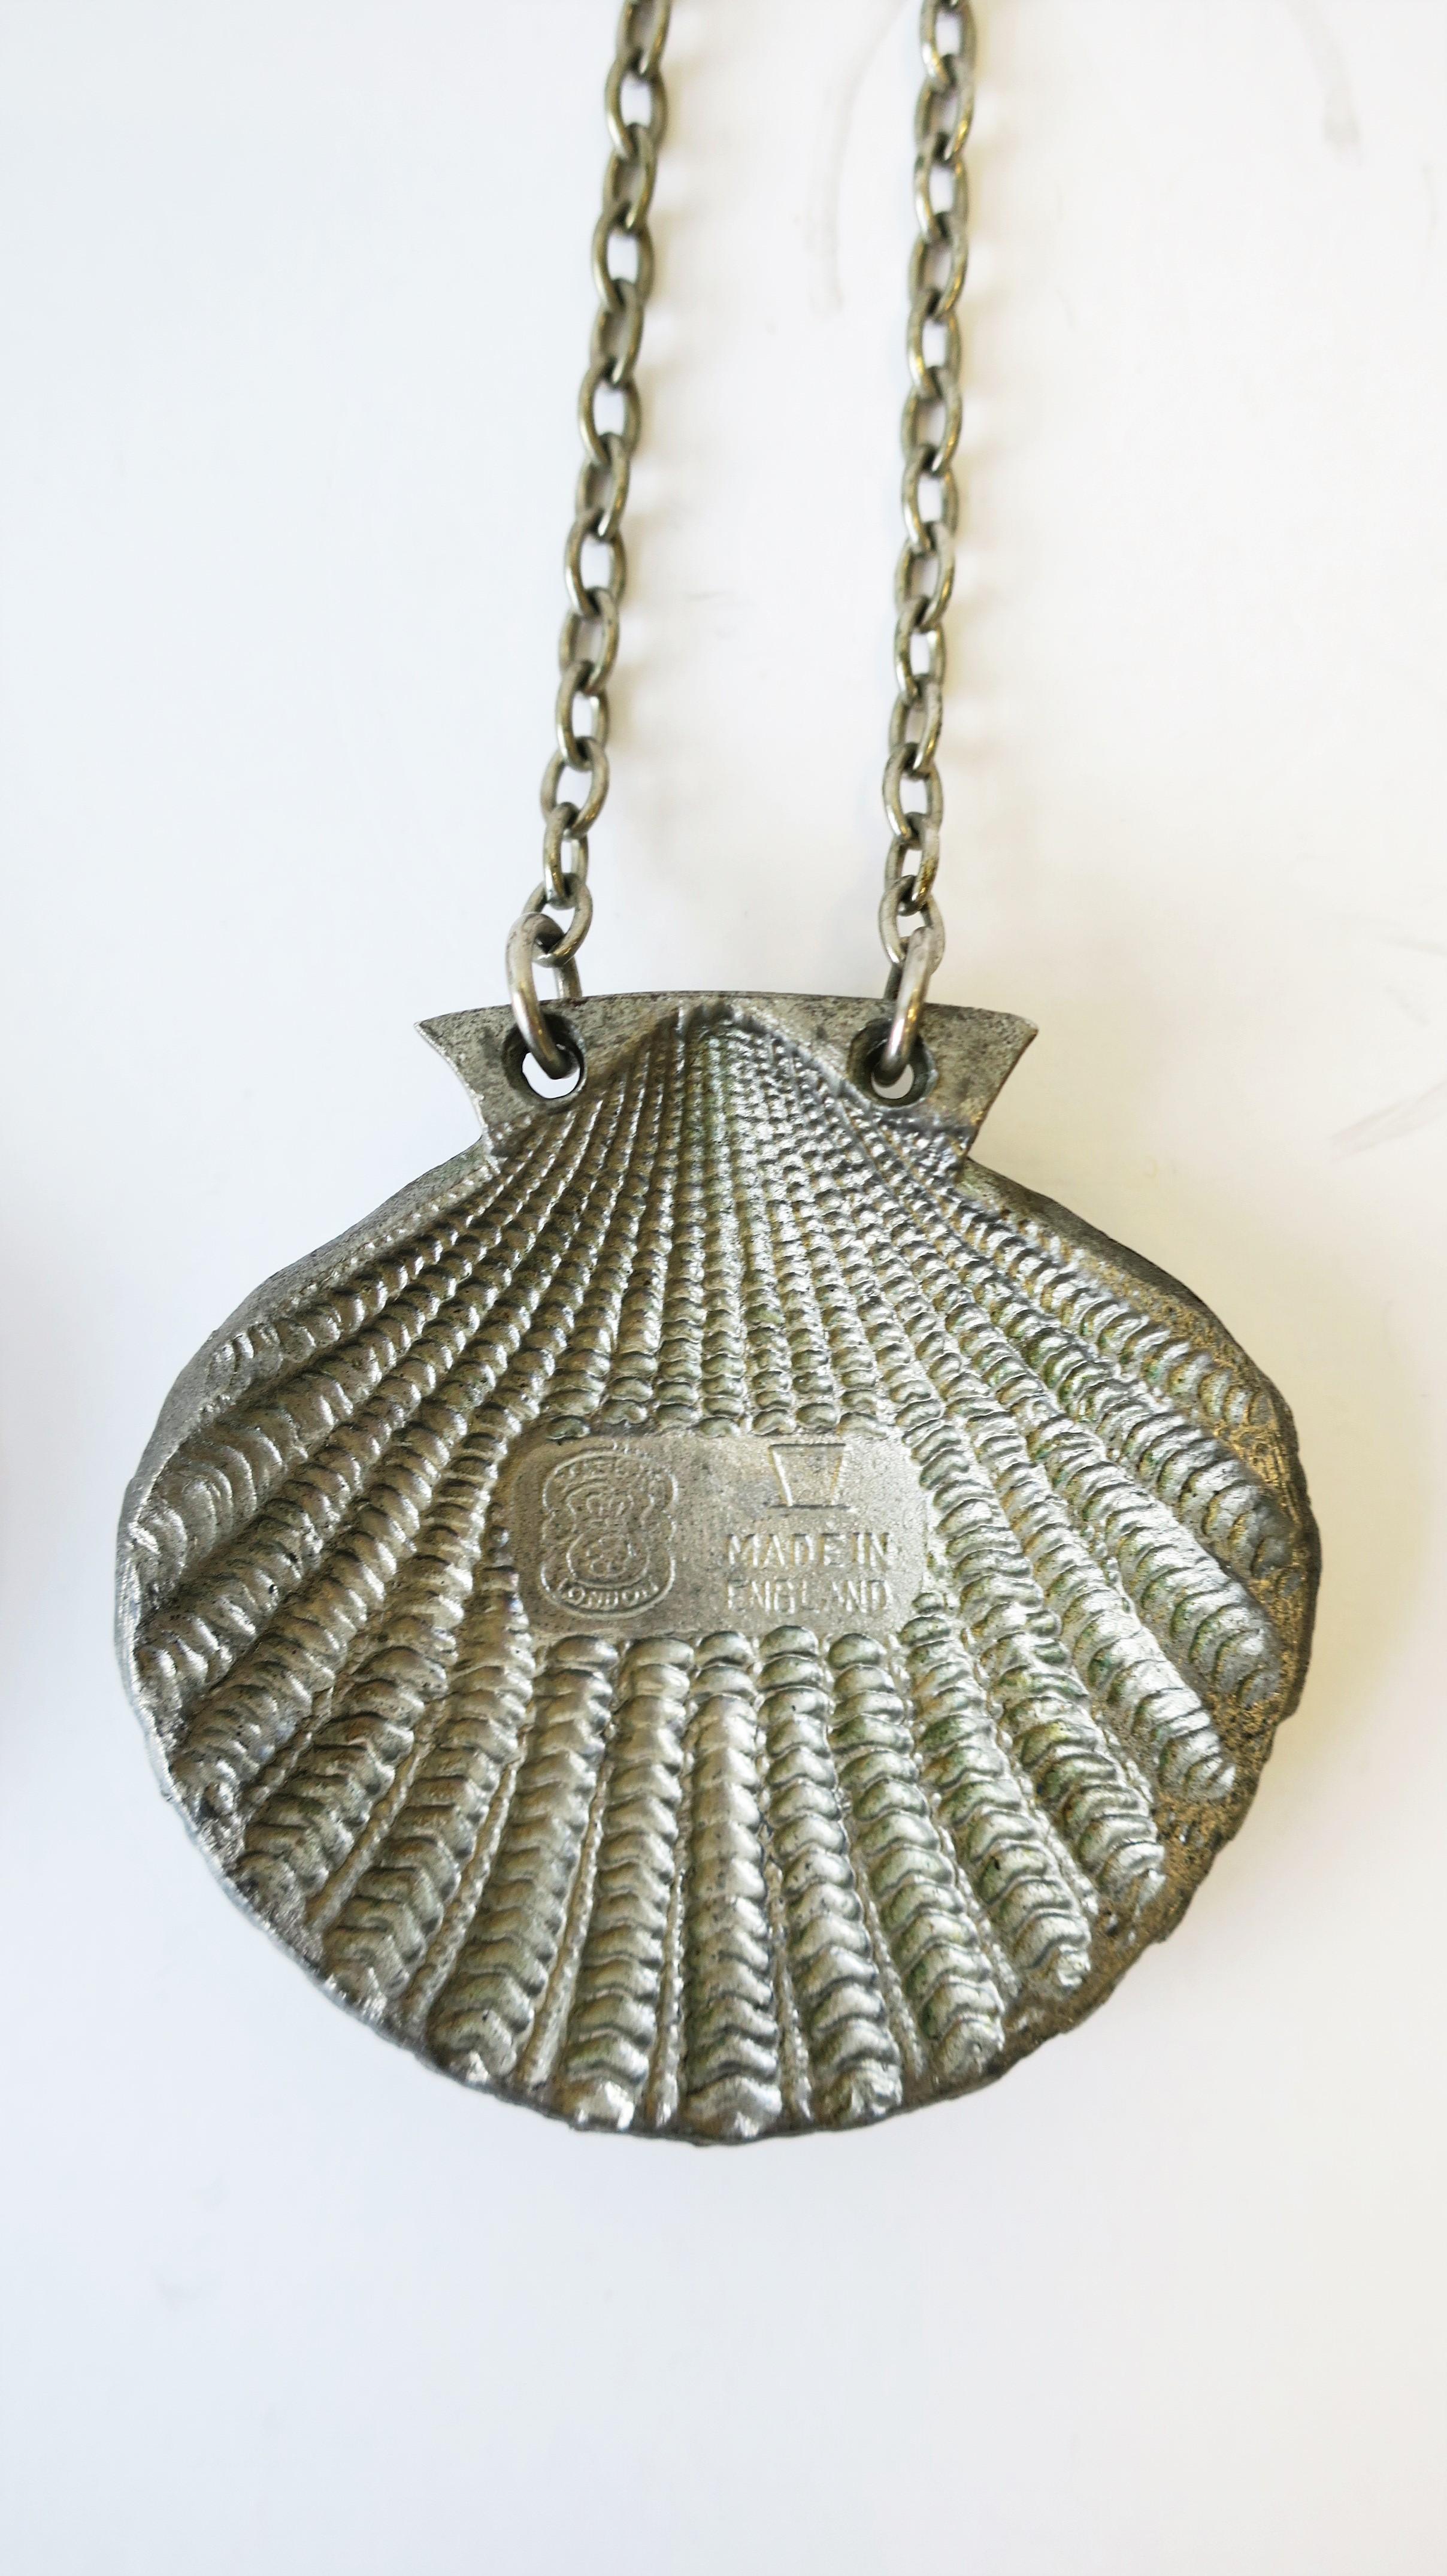 Scallop Seashell Liquor Spirits Bottle or Decanter Label Tags from England For Sale 2